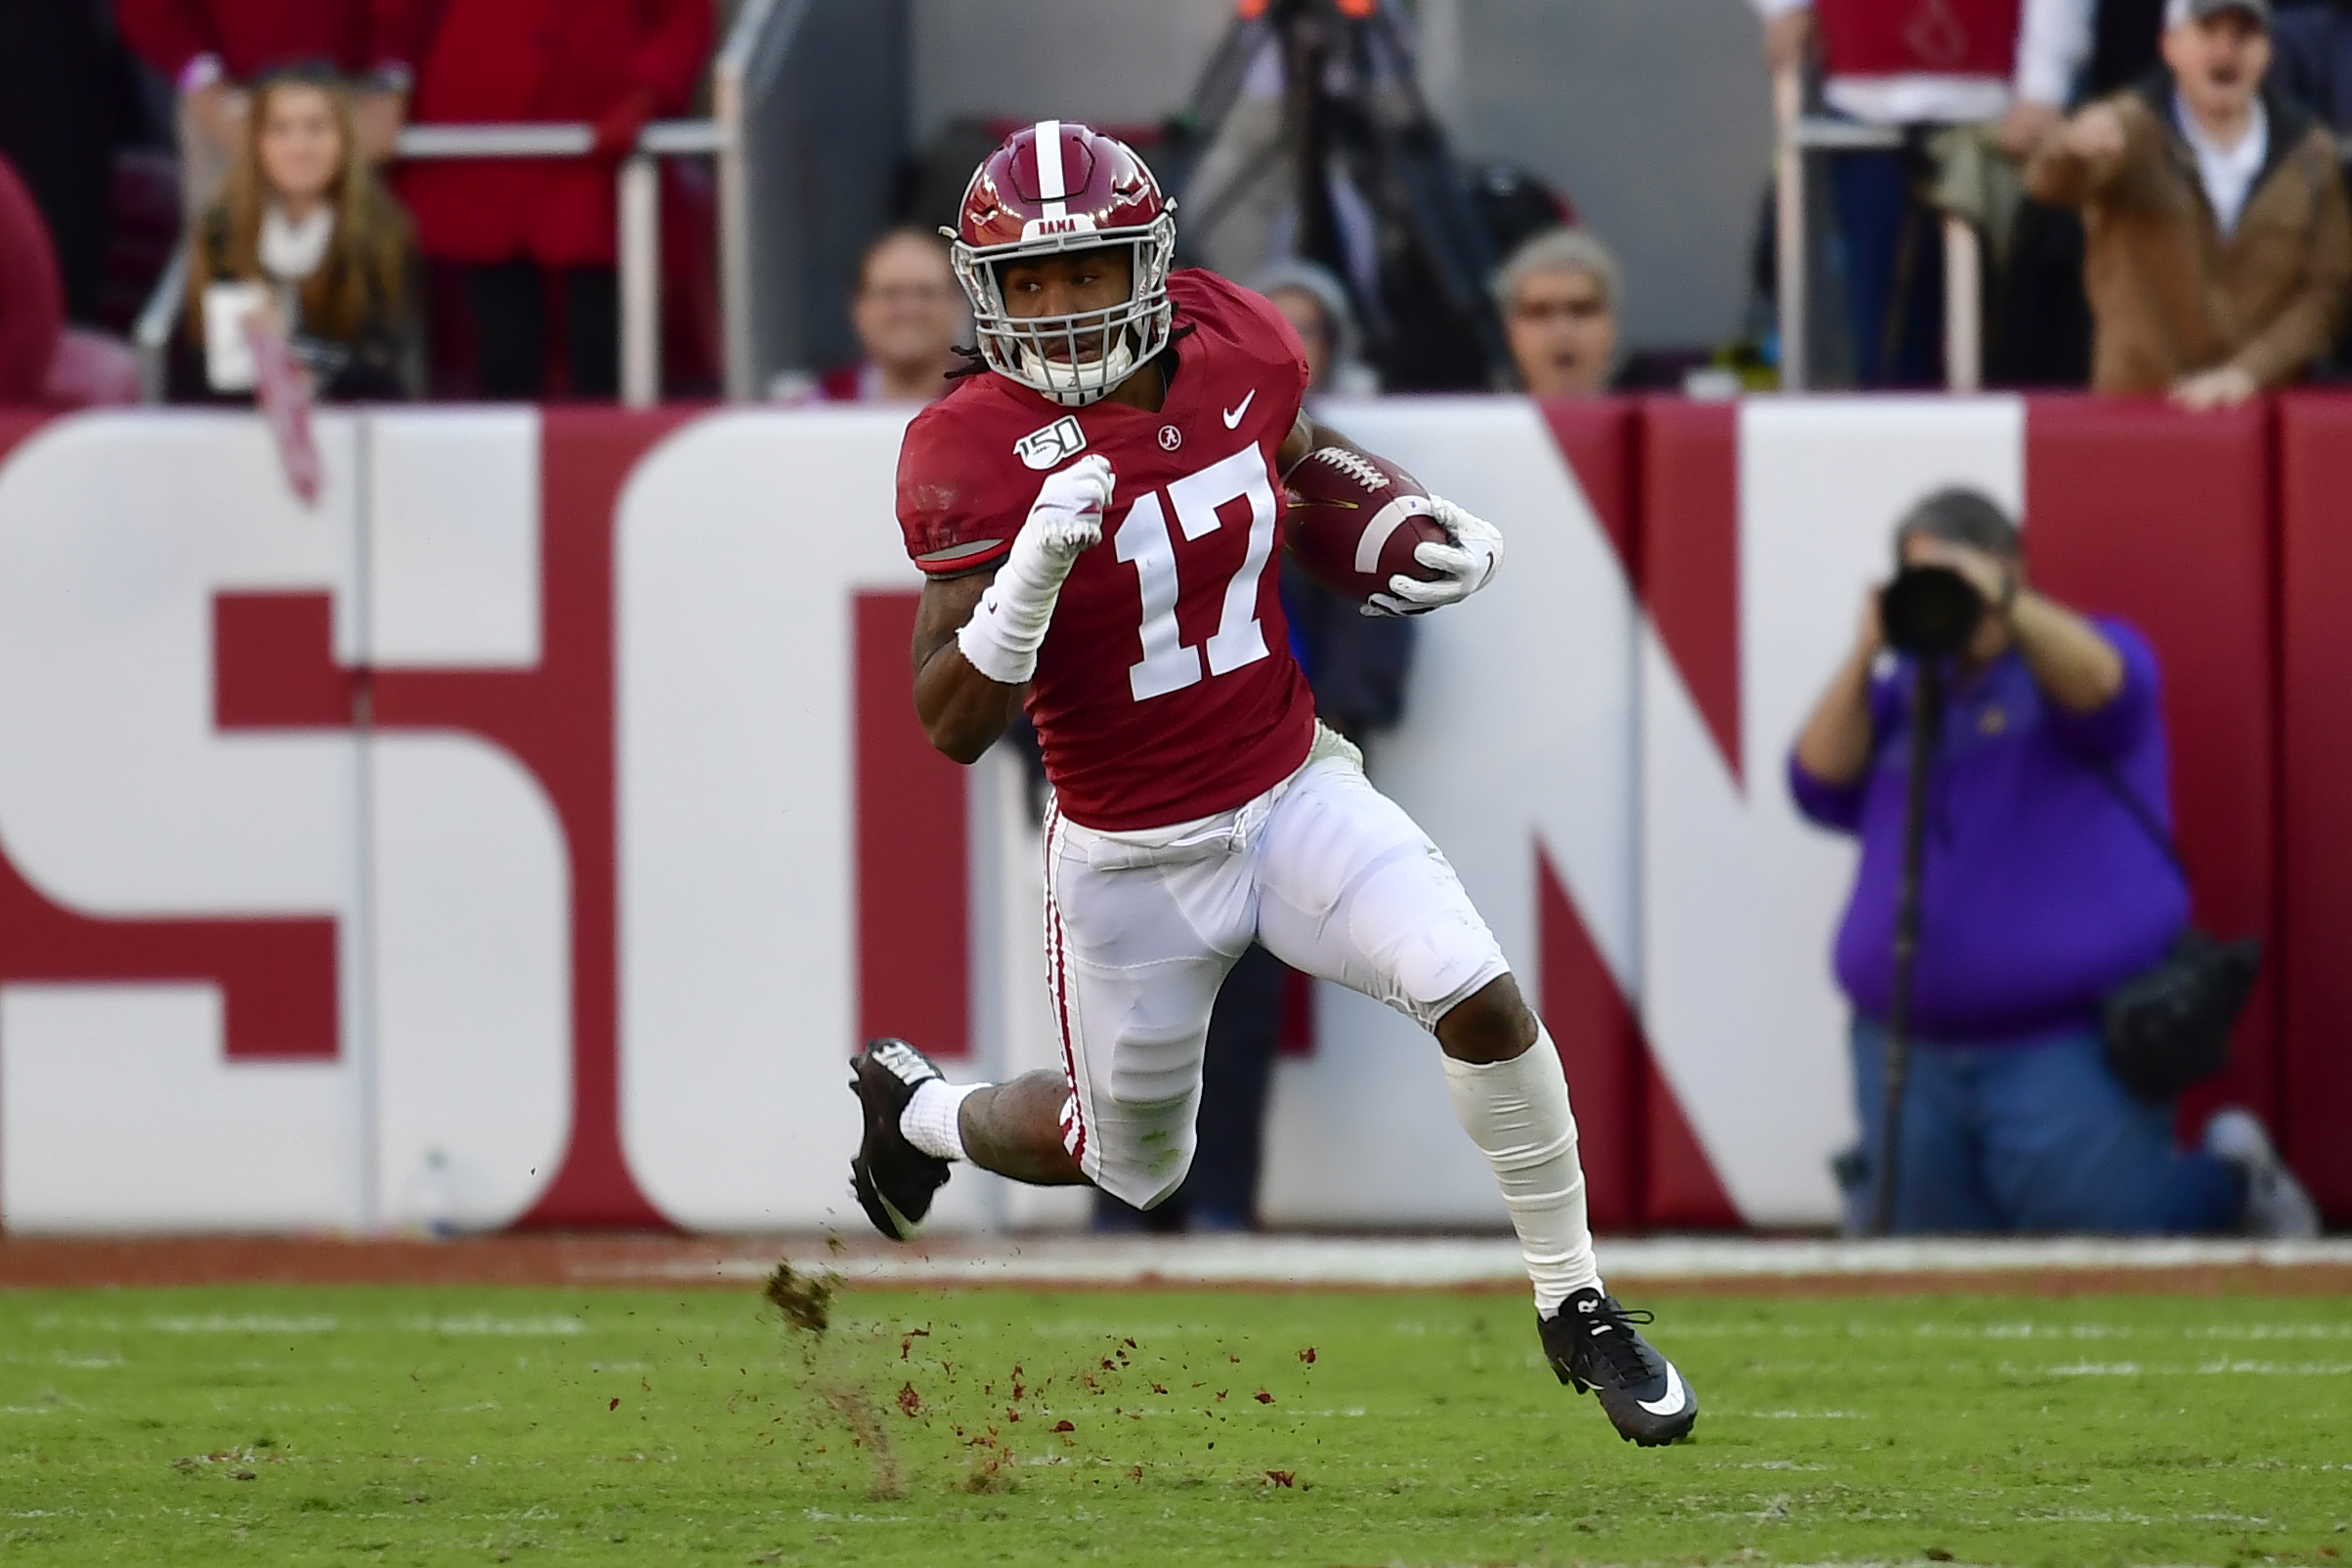 Ranking the Top 10 Wide Receivers of the 2021 NFL Draft Class | Bleacher Report | Latest News, Videos and Highlights